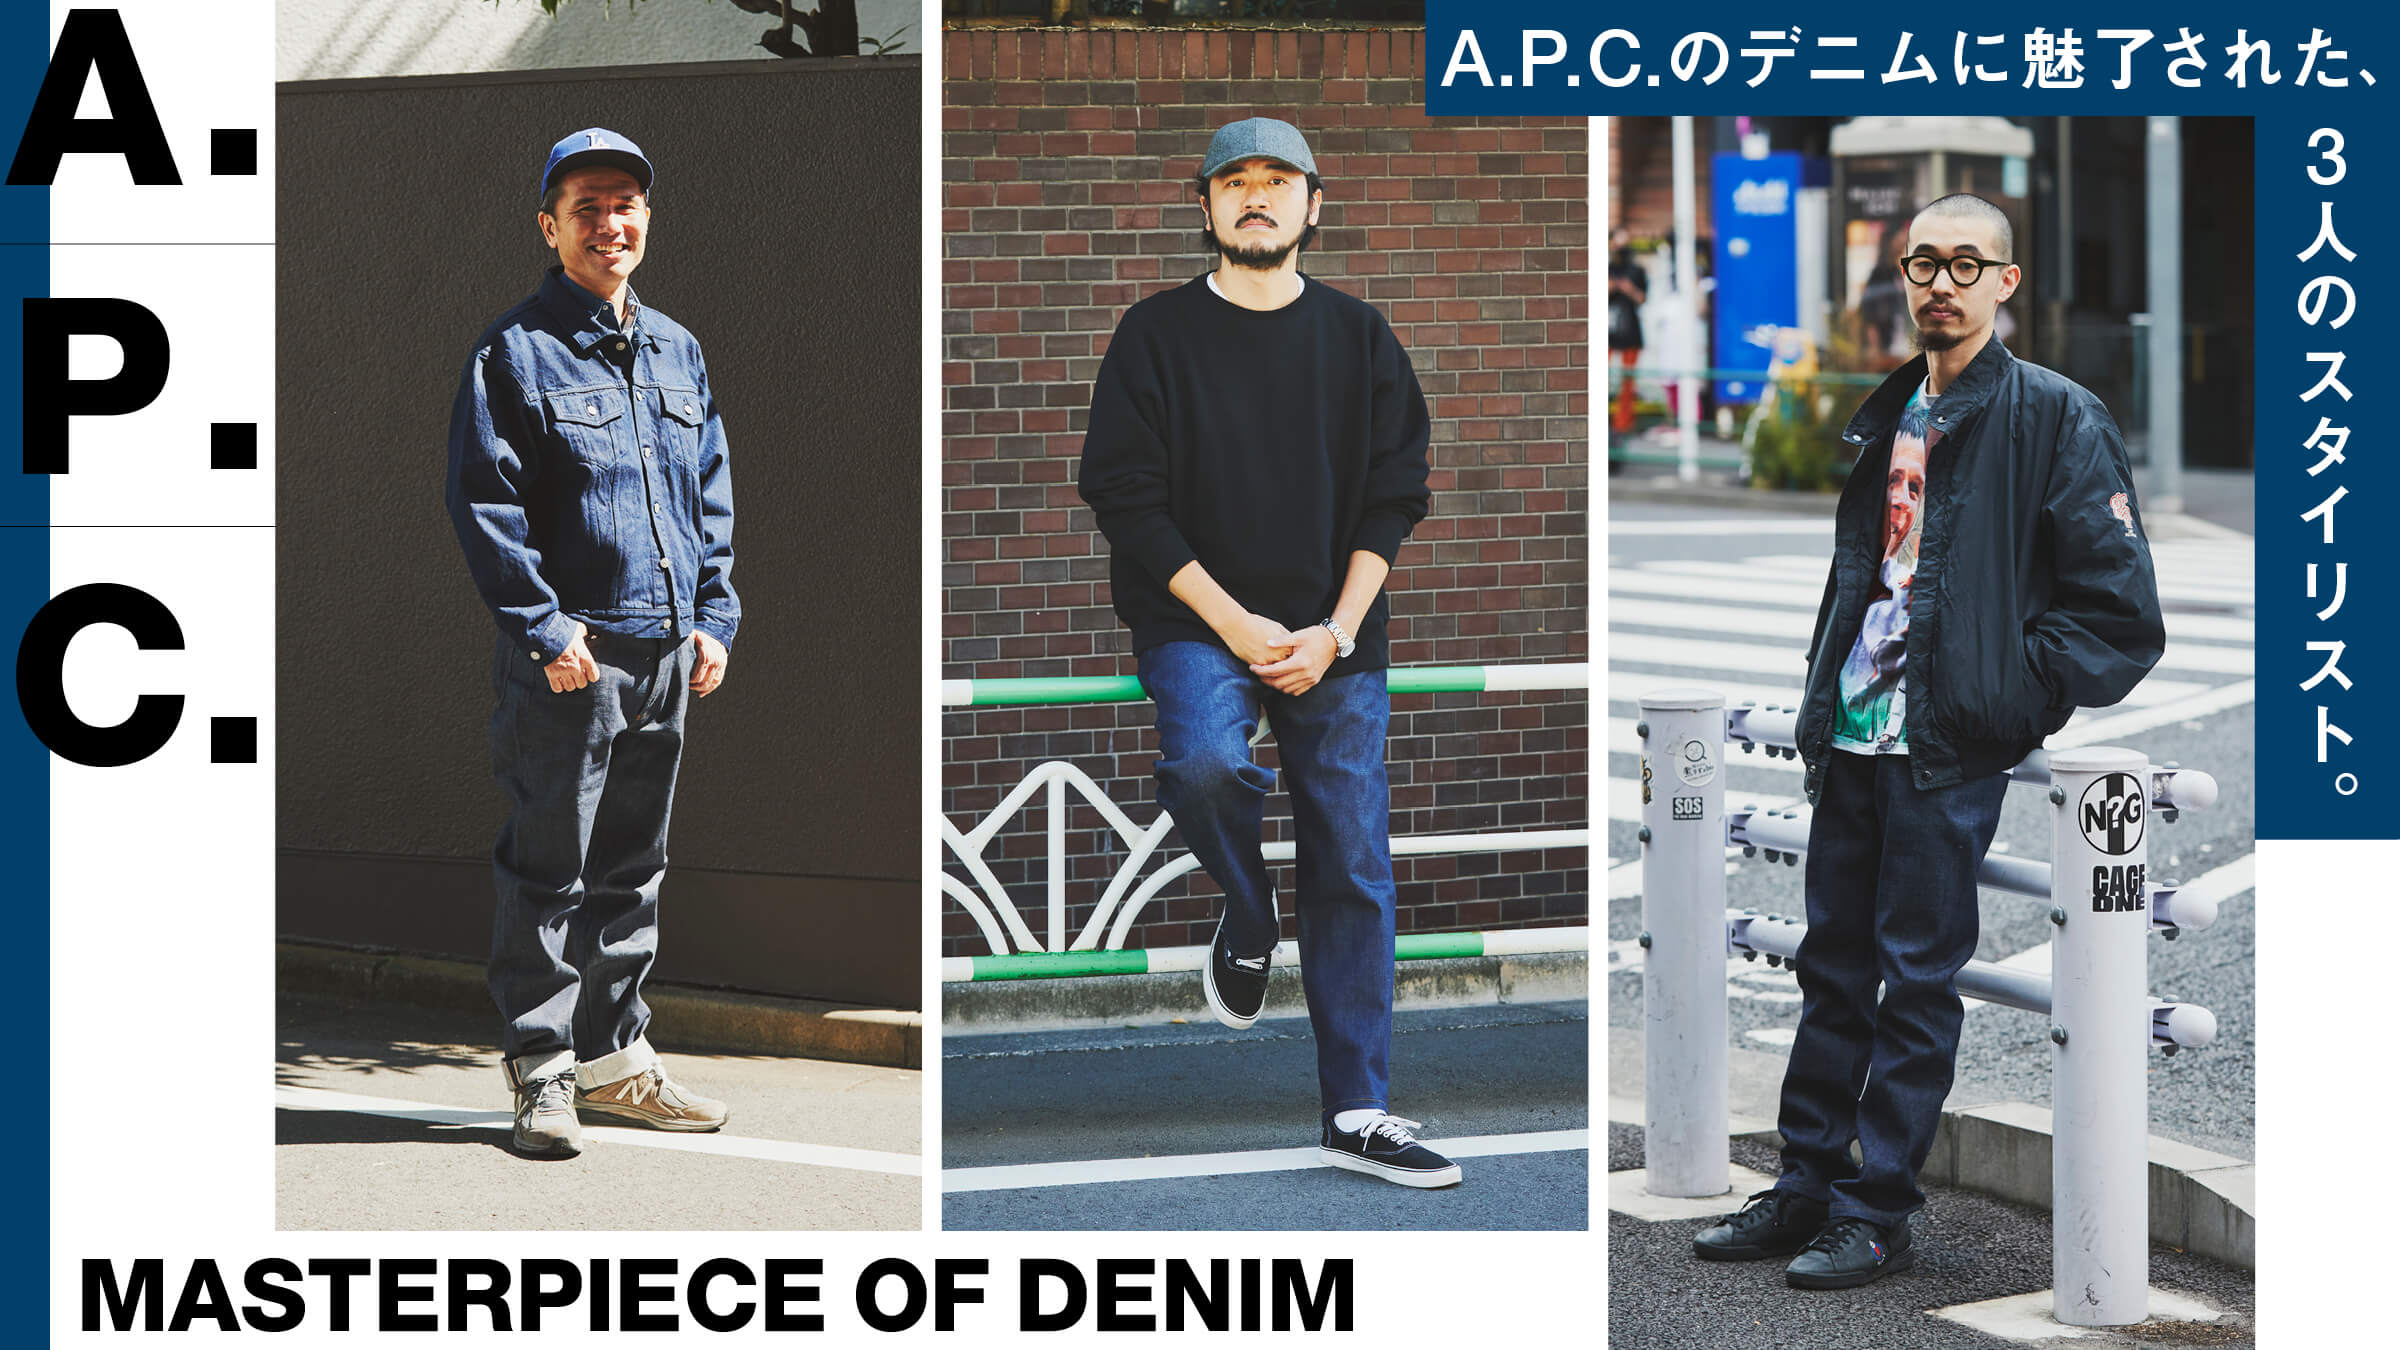 Three stylists were fascinated by A.P.C. denim.